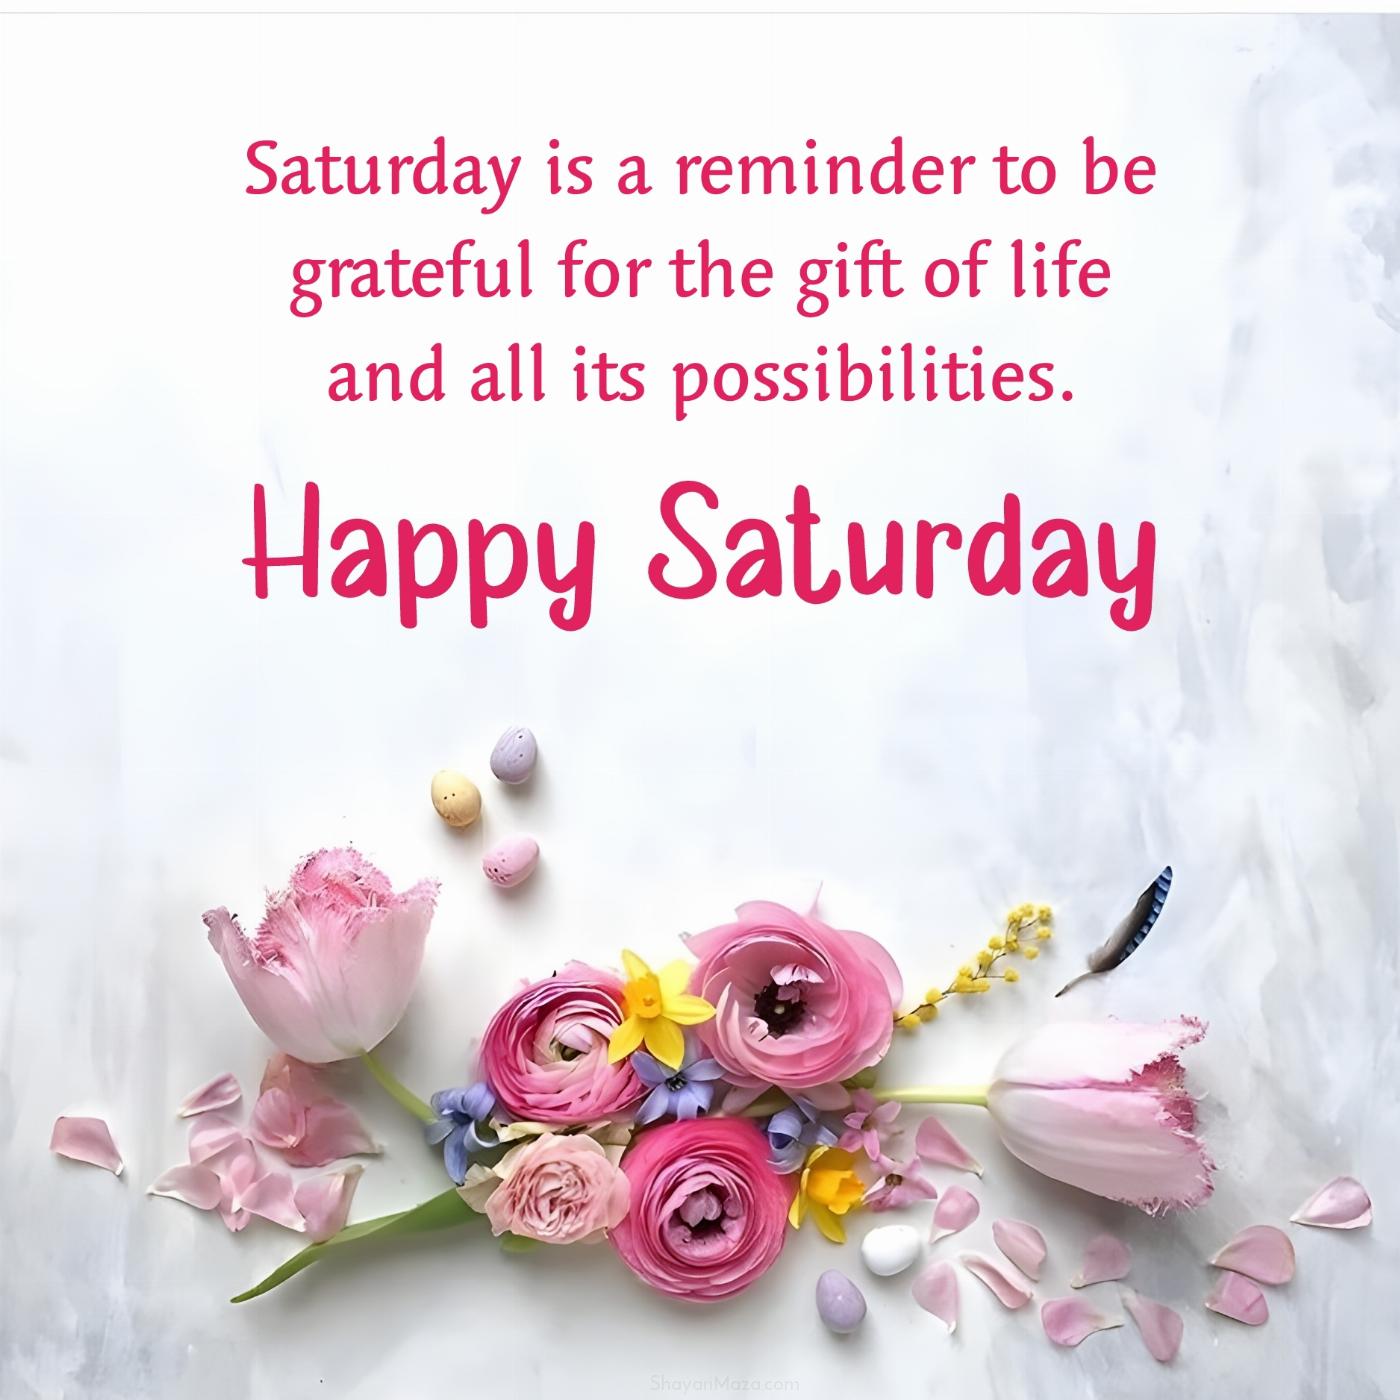 Saturday is a reminder to be grateful for the gift of life